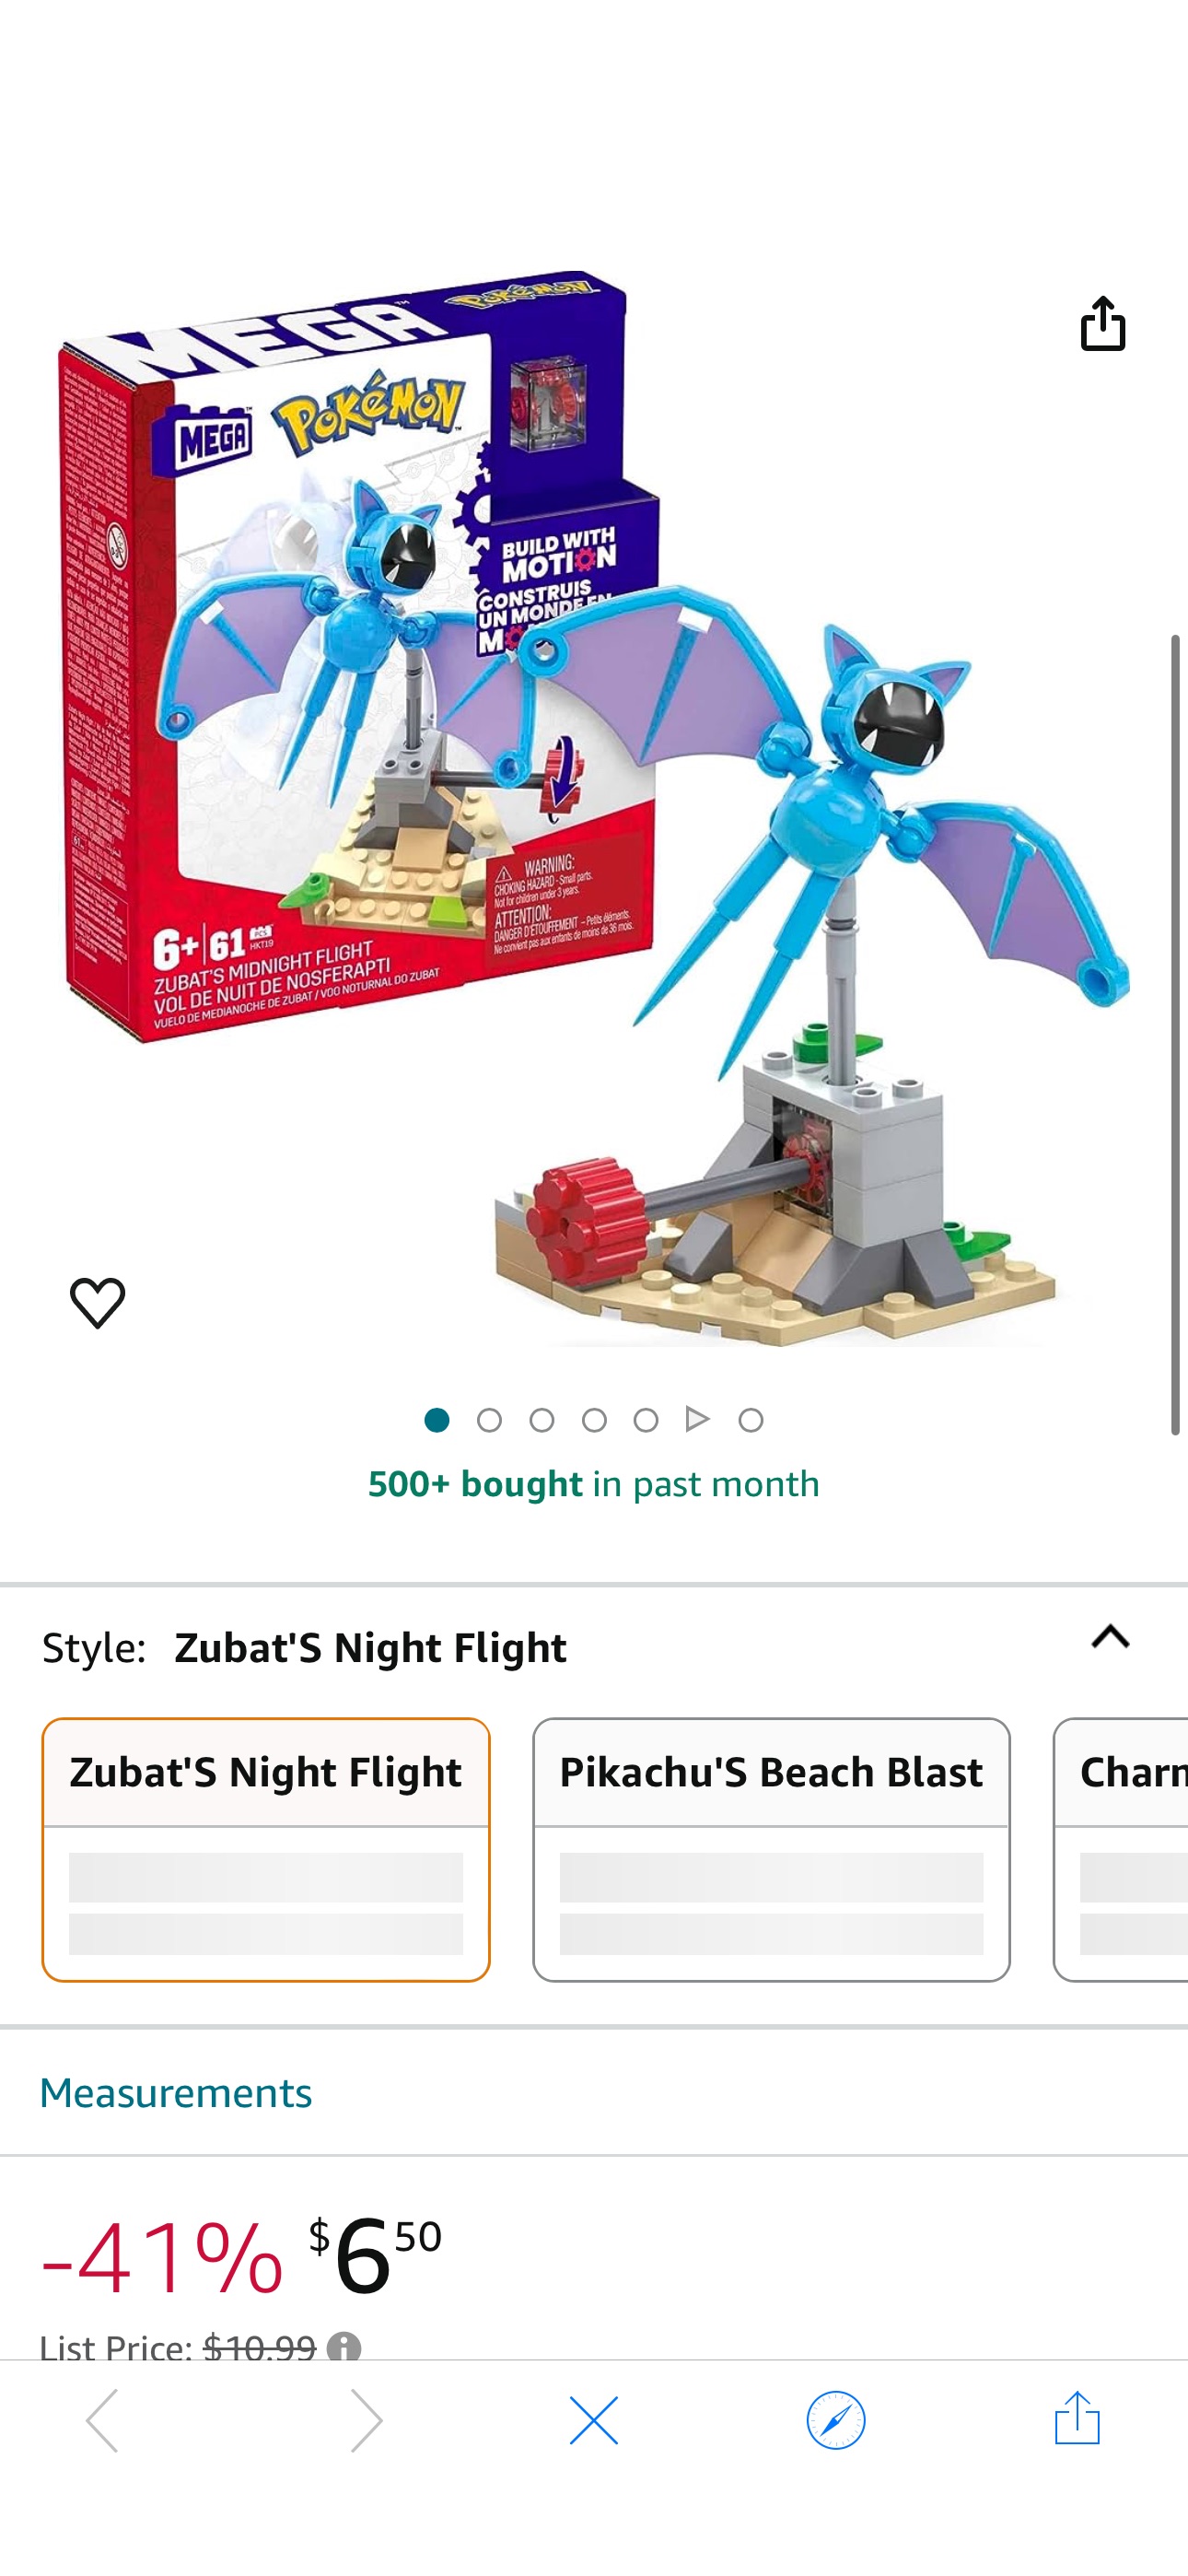 Amazon.com: Mega Pokemon Action Figure Building Toys, Zubat's Midnight Flight with 61 Pieces and Flying Motion, 1 Poseable Character, Gift Idea for Kids : Everything Else